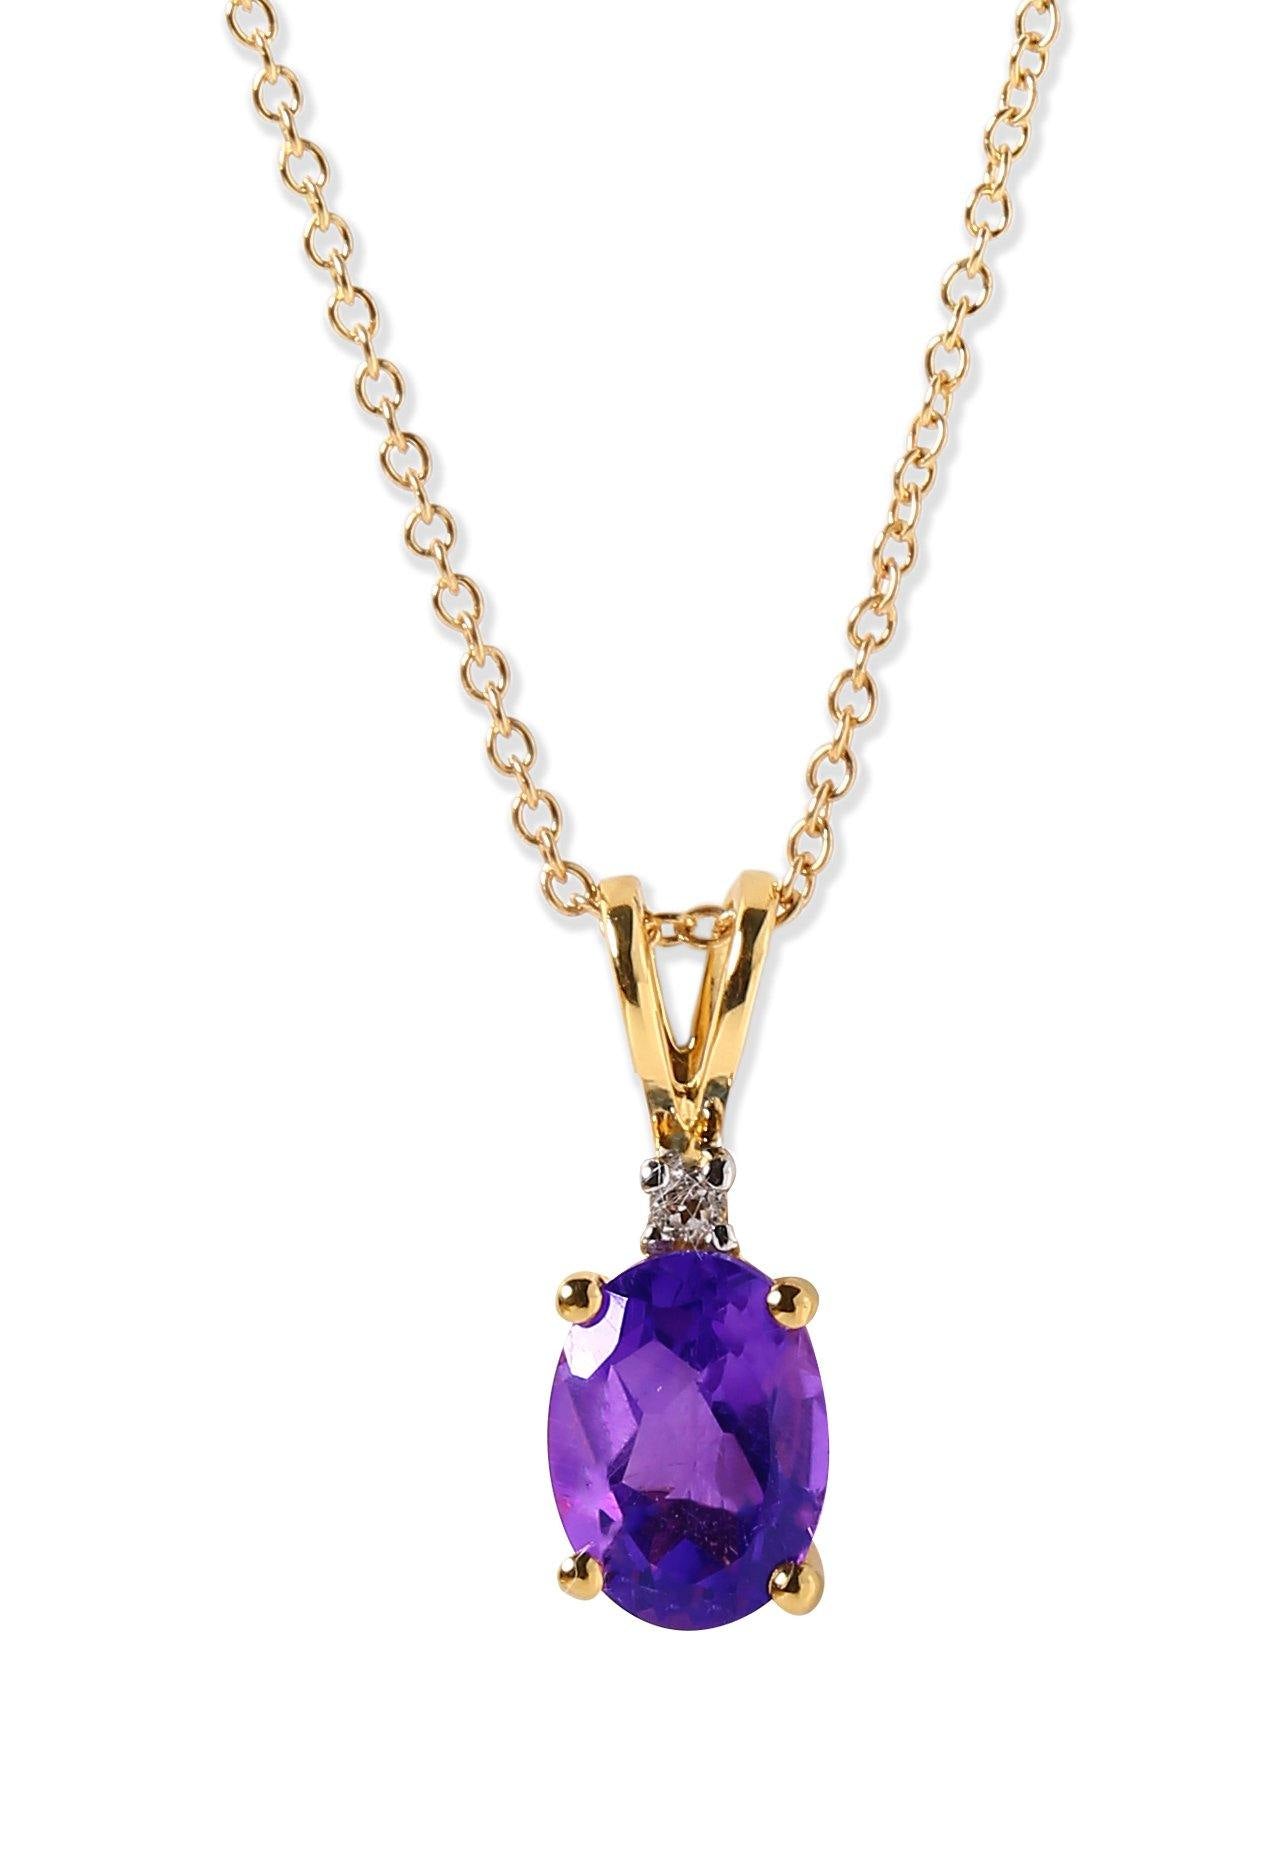 1.13 Ct. Amethyst Solid 10k Yellow Gold Chain Pendant Necklace Jewelry - YoTreasure